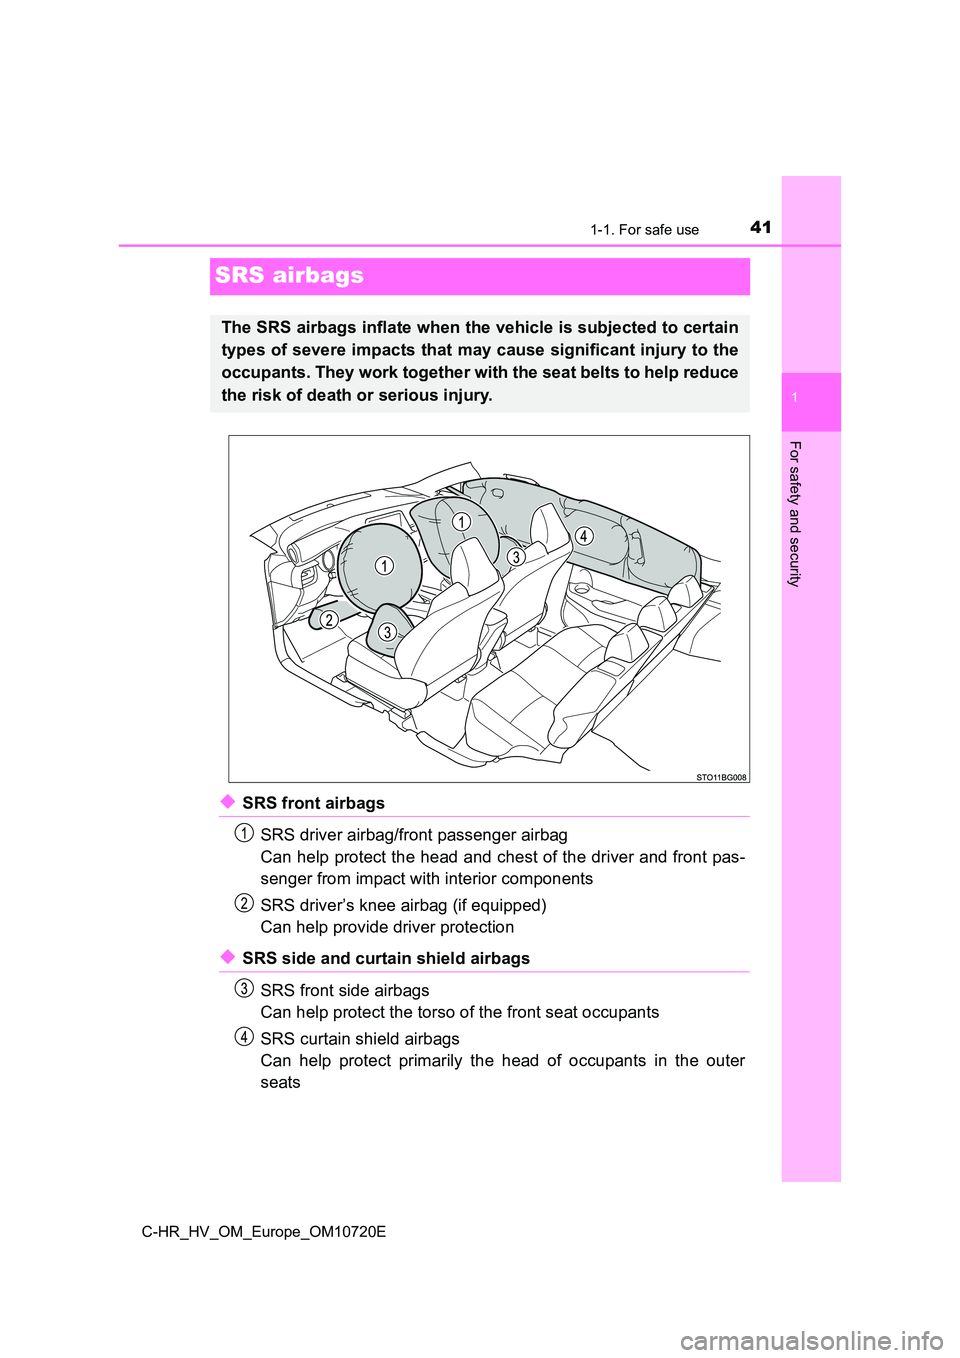 TOYOTA C-HR 2022  Owners Manual 411-1. For safe use
1
For safety and security
C-HR_HV_OM_Europe_OM10720E
SRS airbags
◆SRS front airbags 
SRS driver airbag/front passenger airbag 
Can help protect the head and chest of the driver a